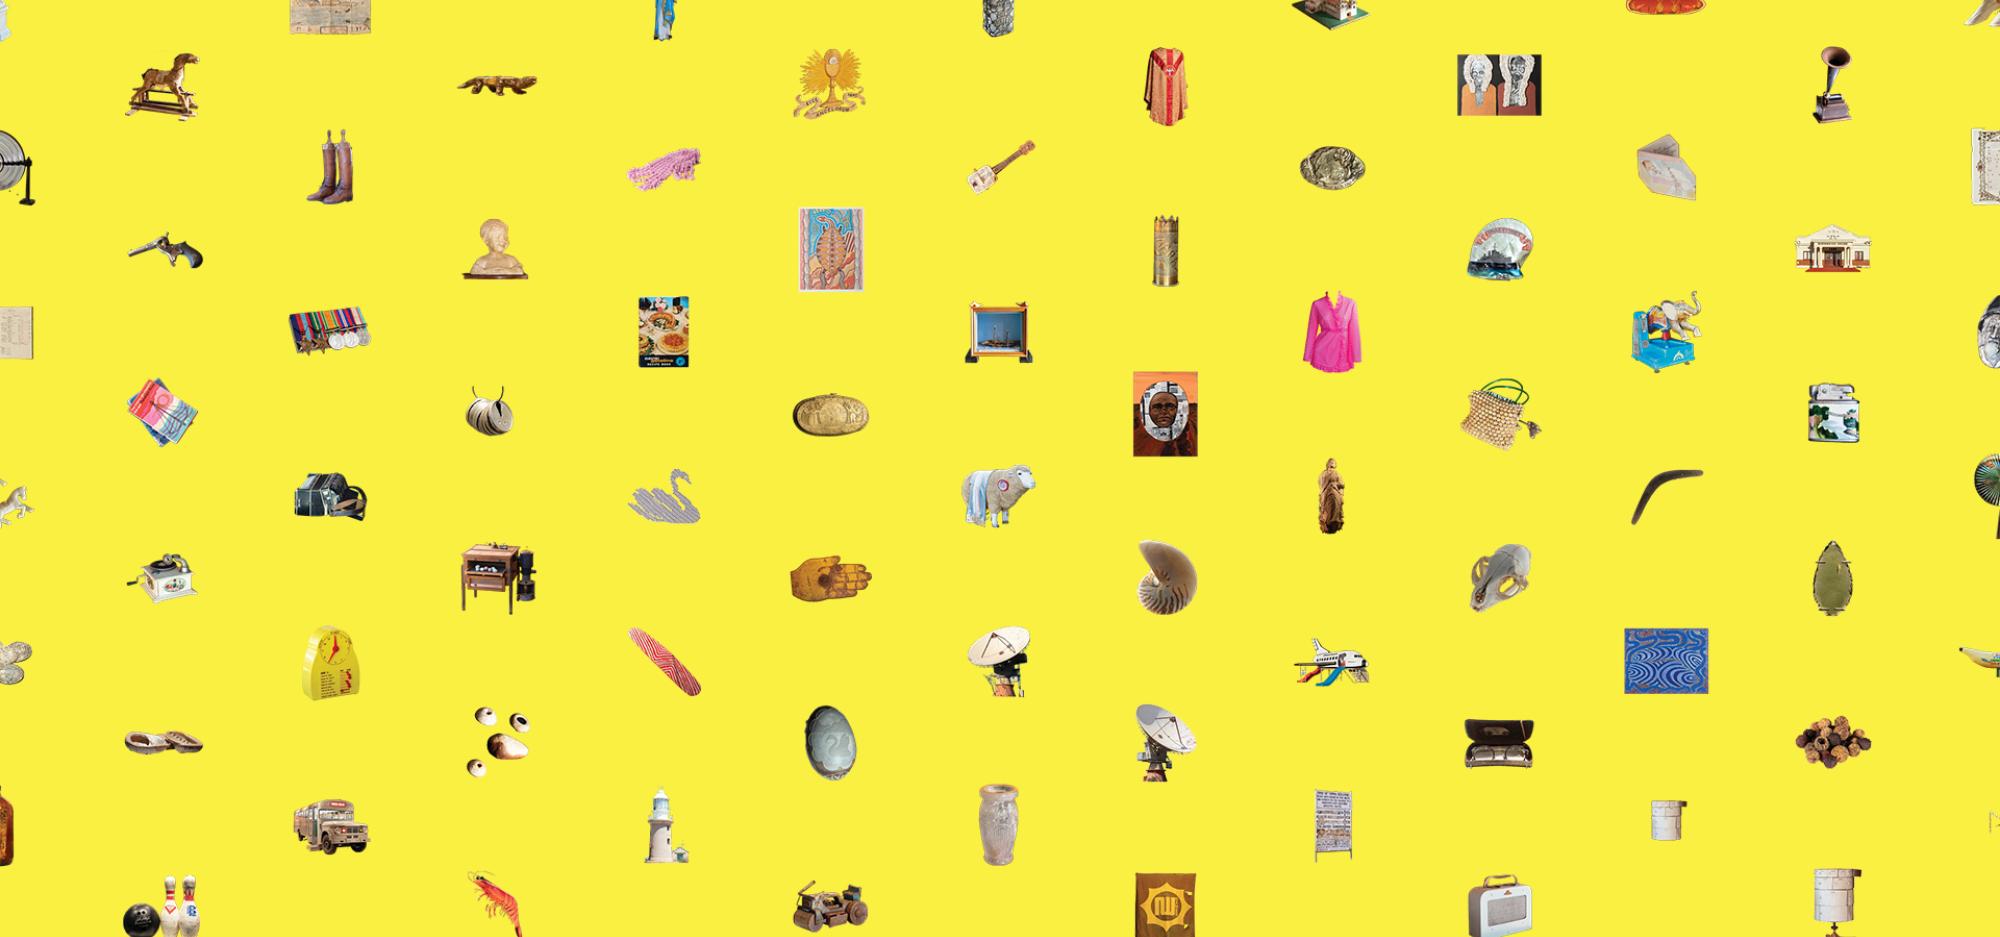 Collections objects from different museums arranged on a bright yellow background